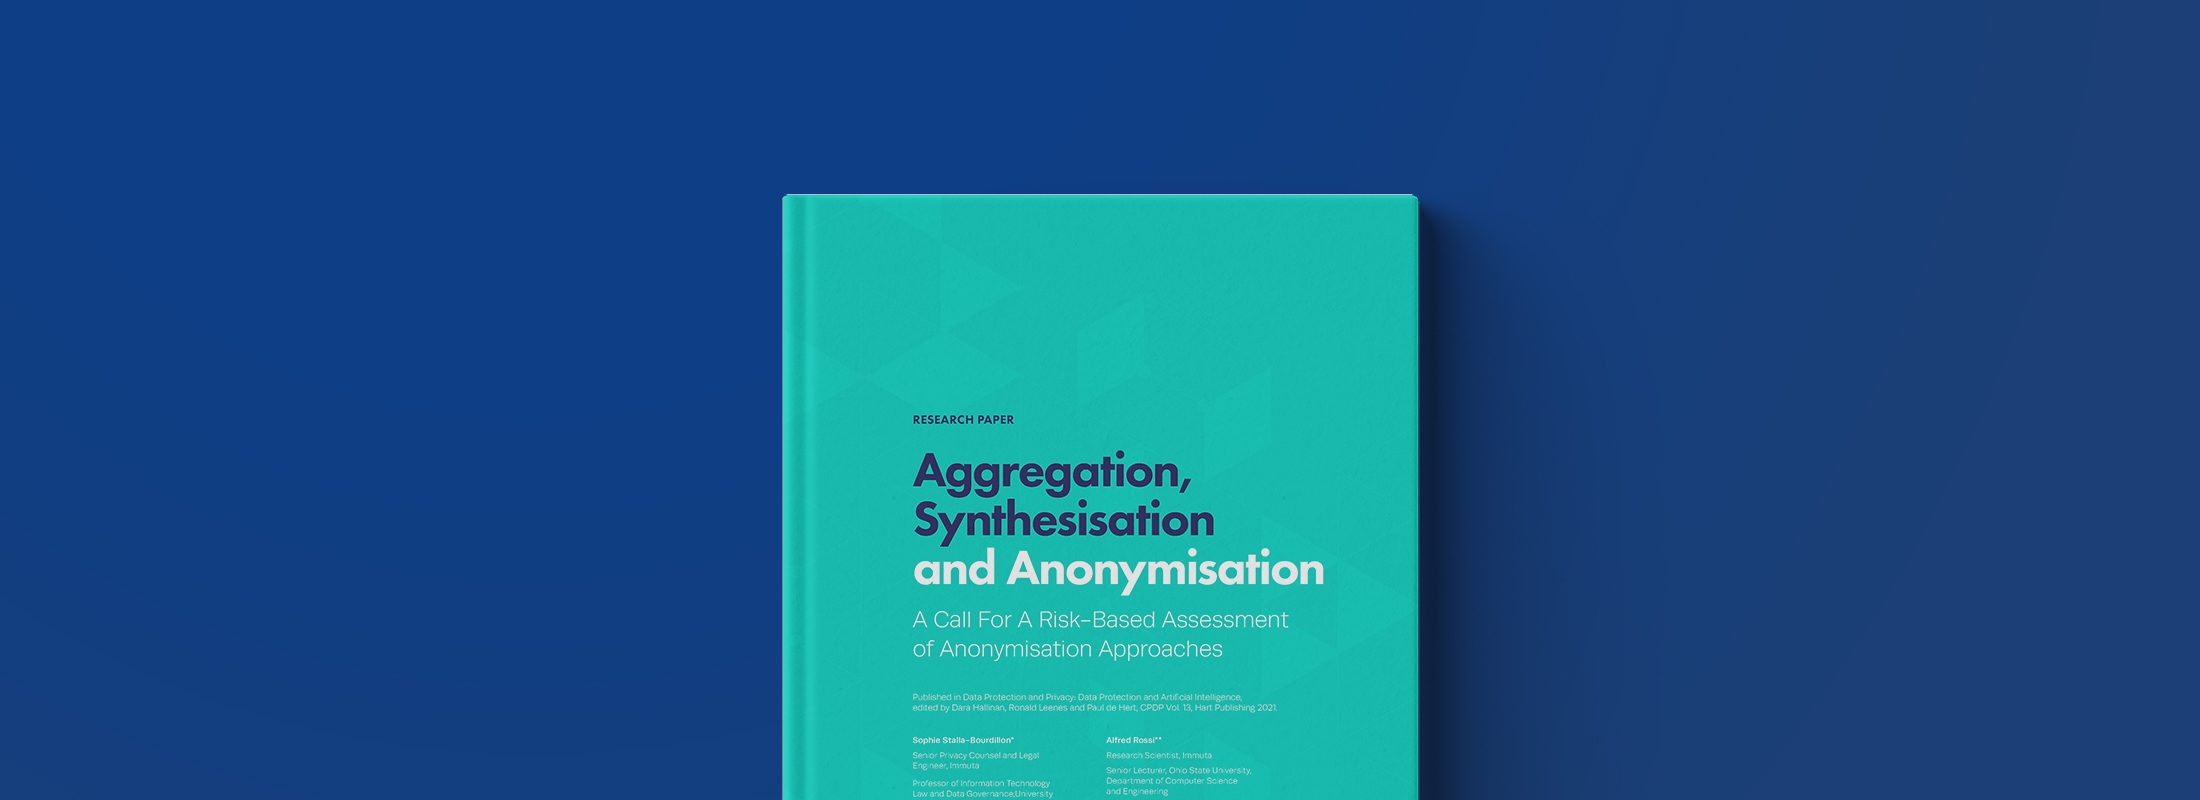 Aggregation, Synthesisation, and Anonymisation